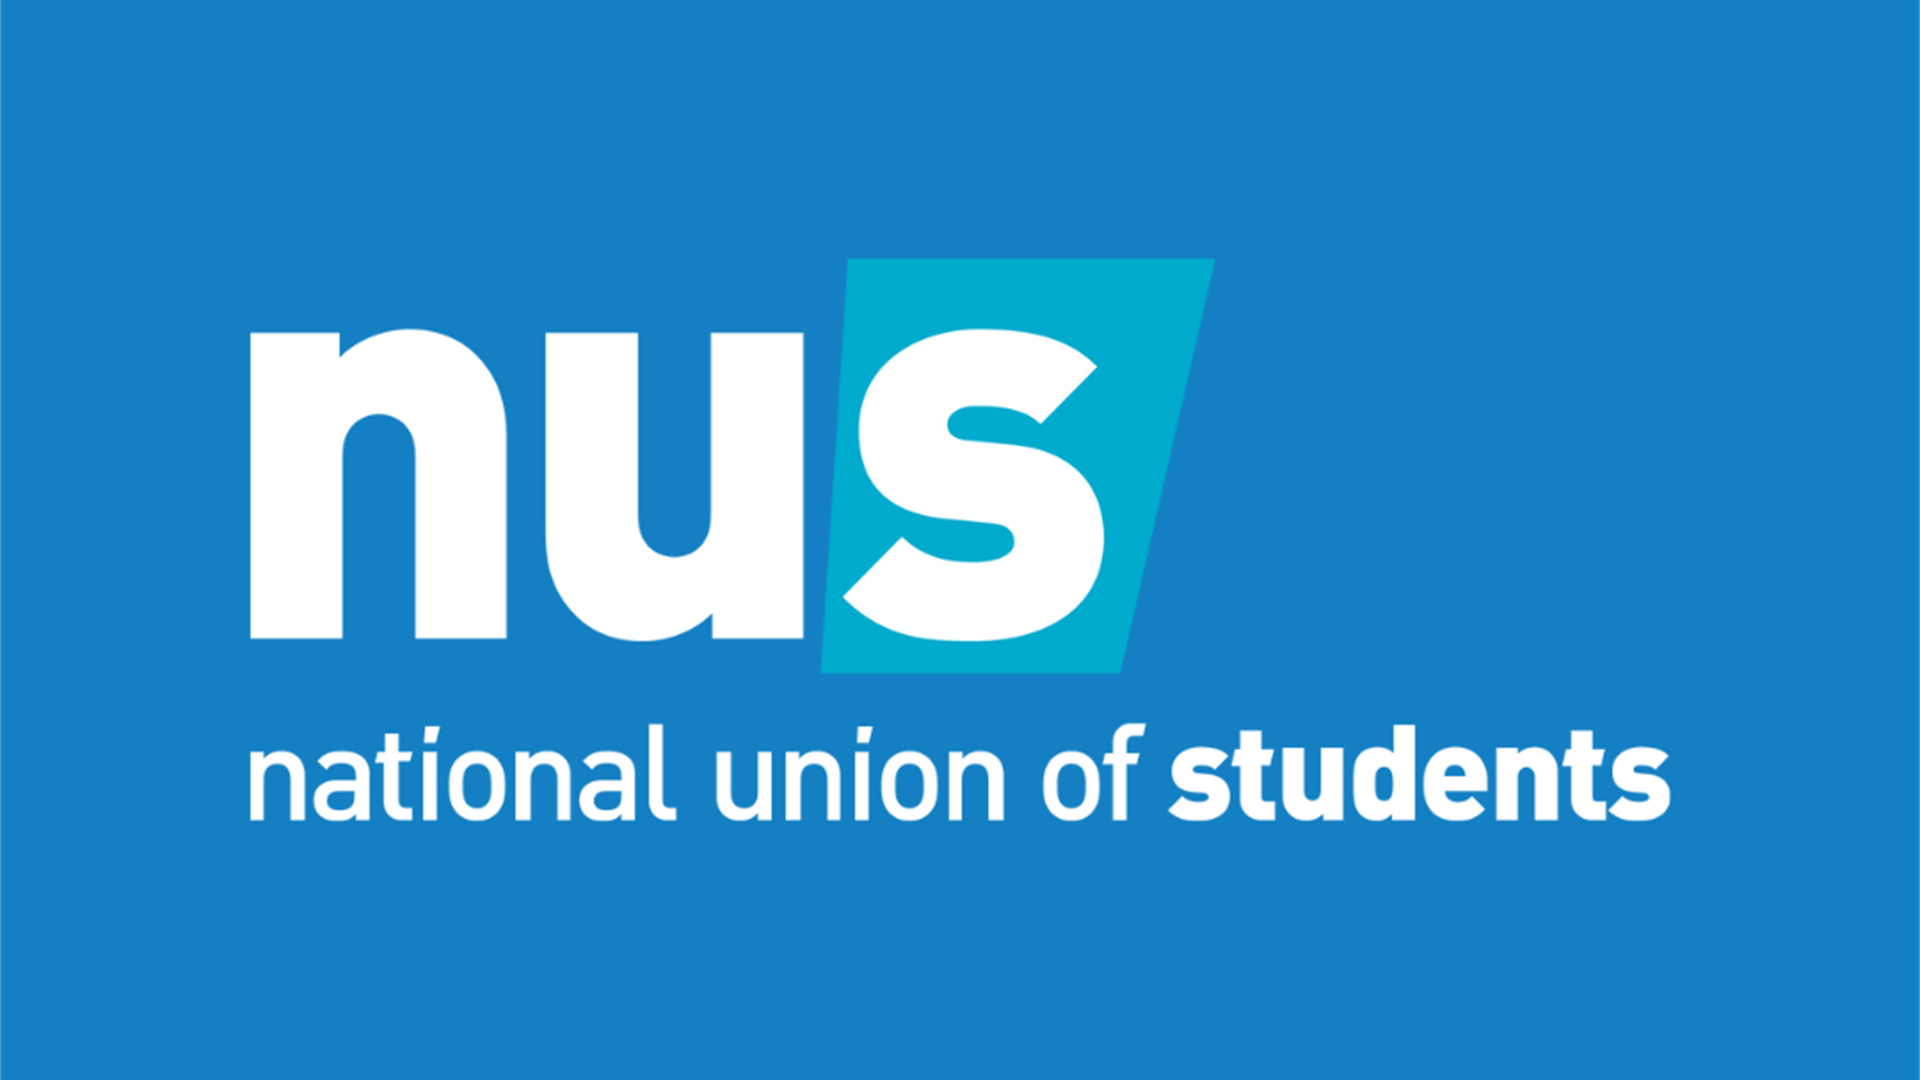 Arts SU is an affiliate of the National Union of Students. Find out how you can get involved in with the national student movement here